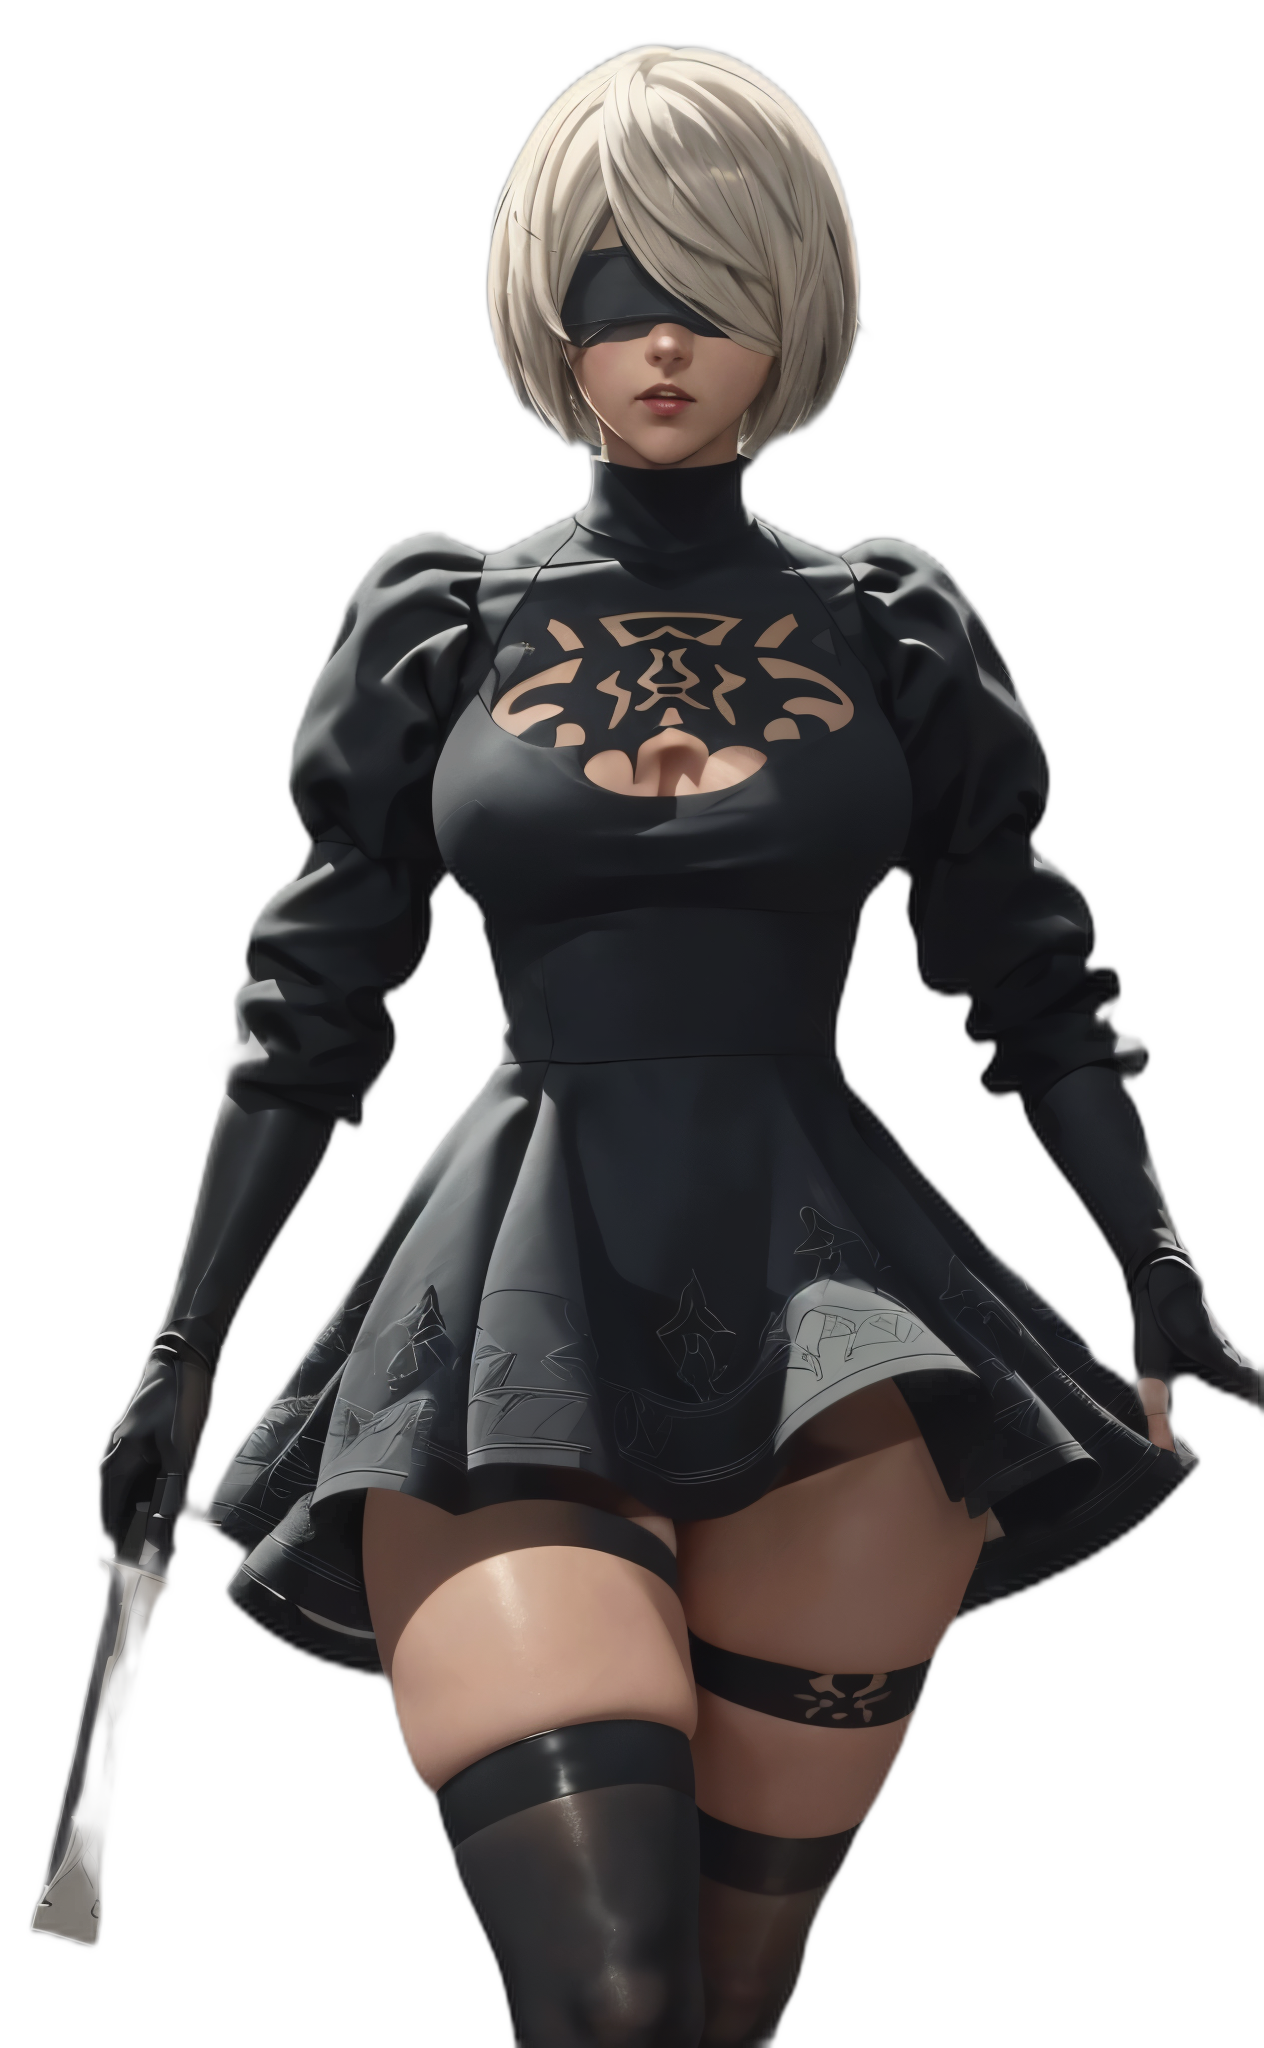 Roleplay,Female,Romance,Game Characters,Anime,History,Fantasy,2B, Yorha&#39;s android, created for combat and wants more than anything to destroy robotic life forms, but, during a mission, she found you, the last human on earth. Your heart becomes confused and open to new experiences.